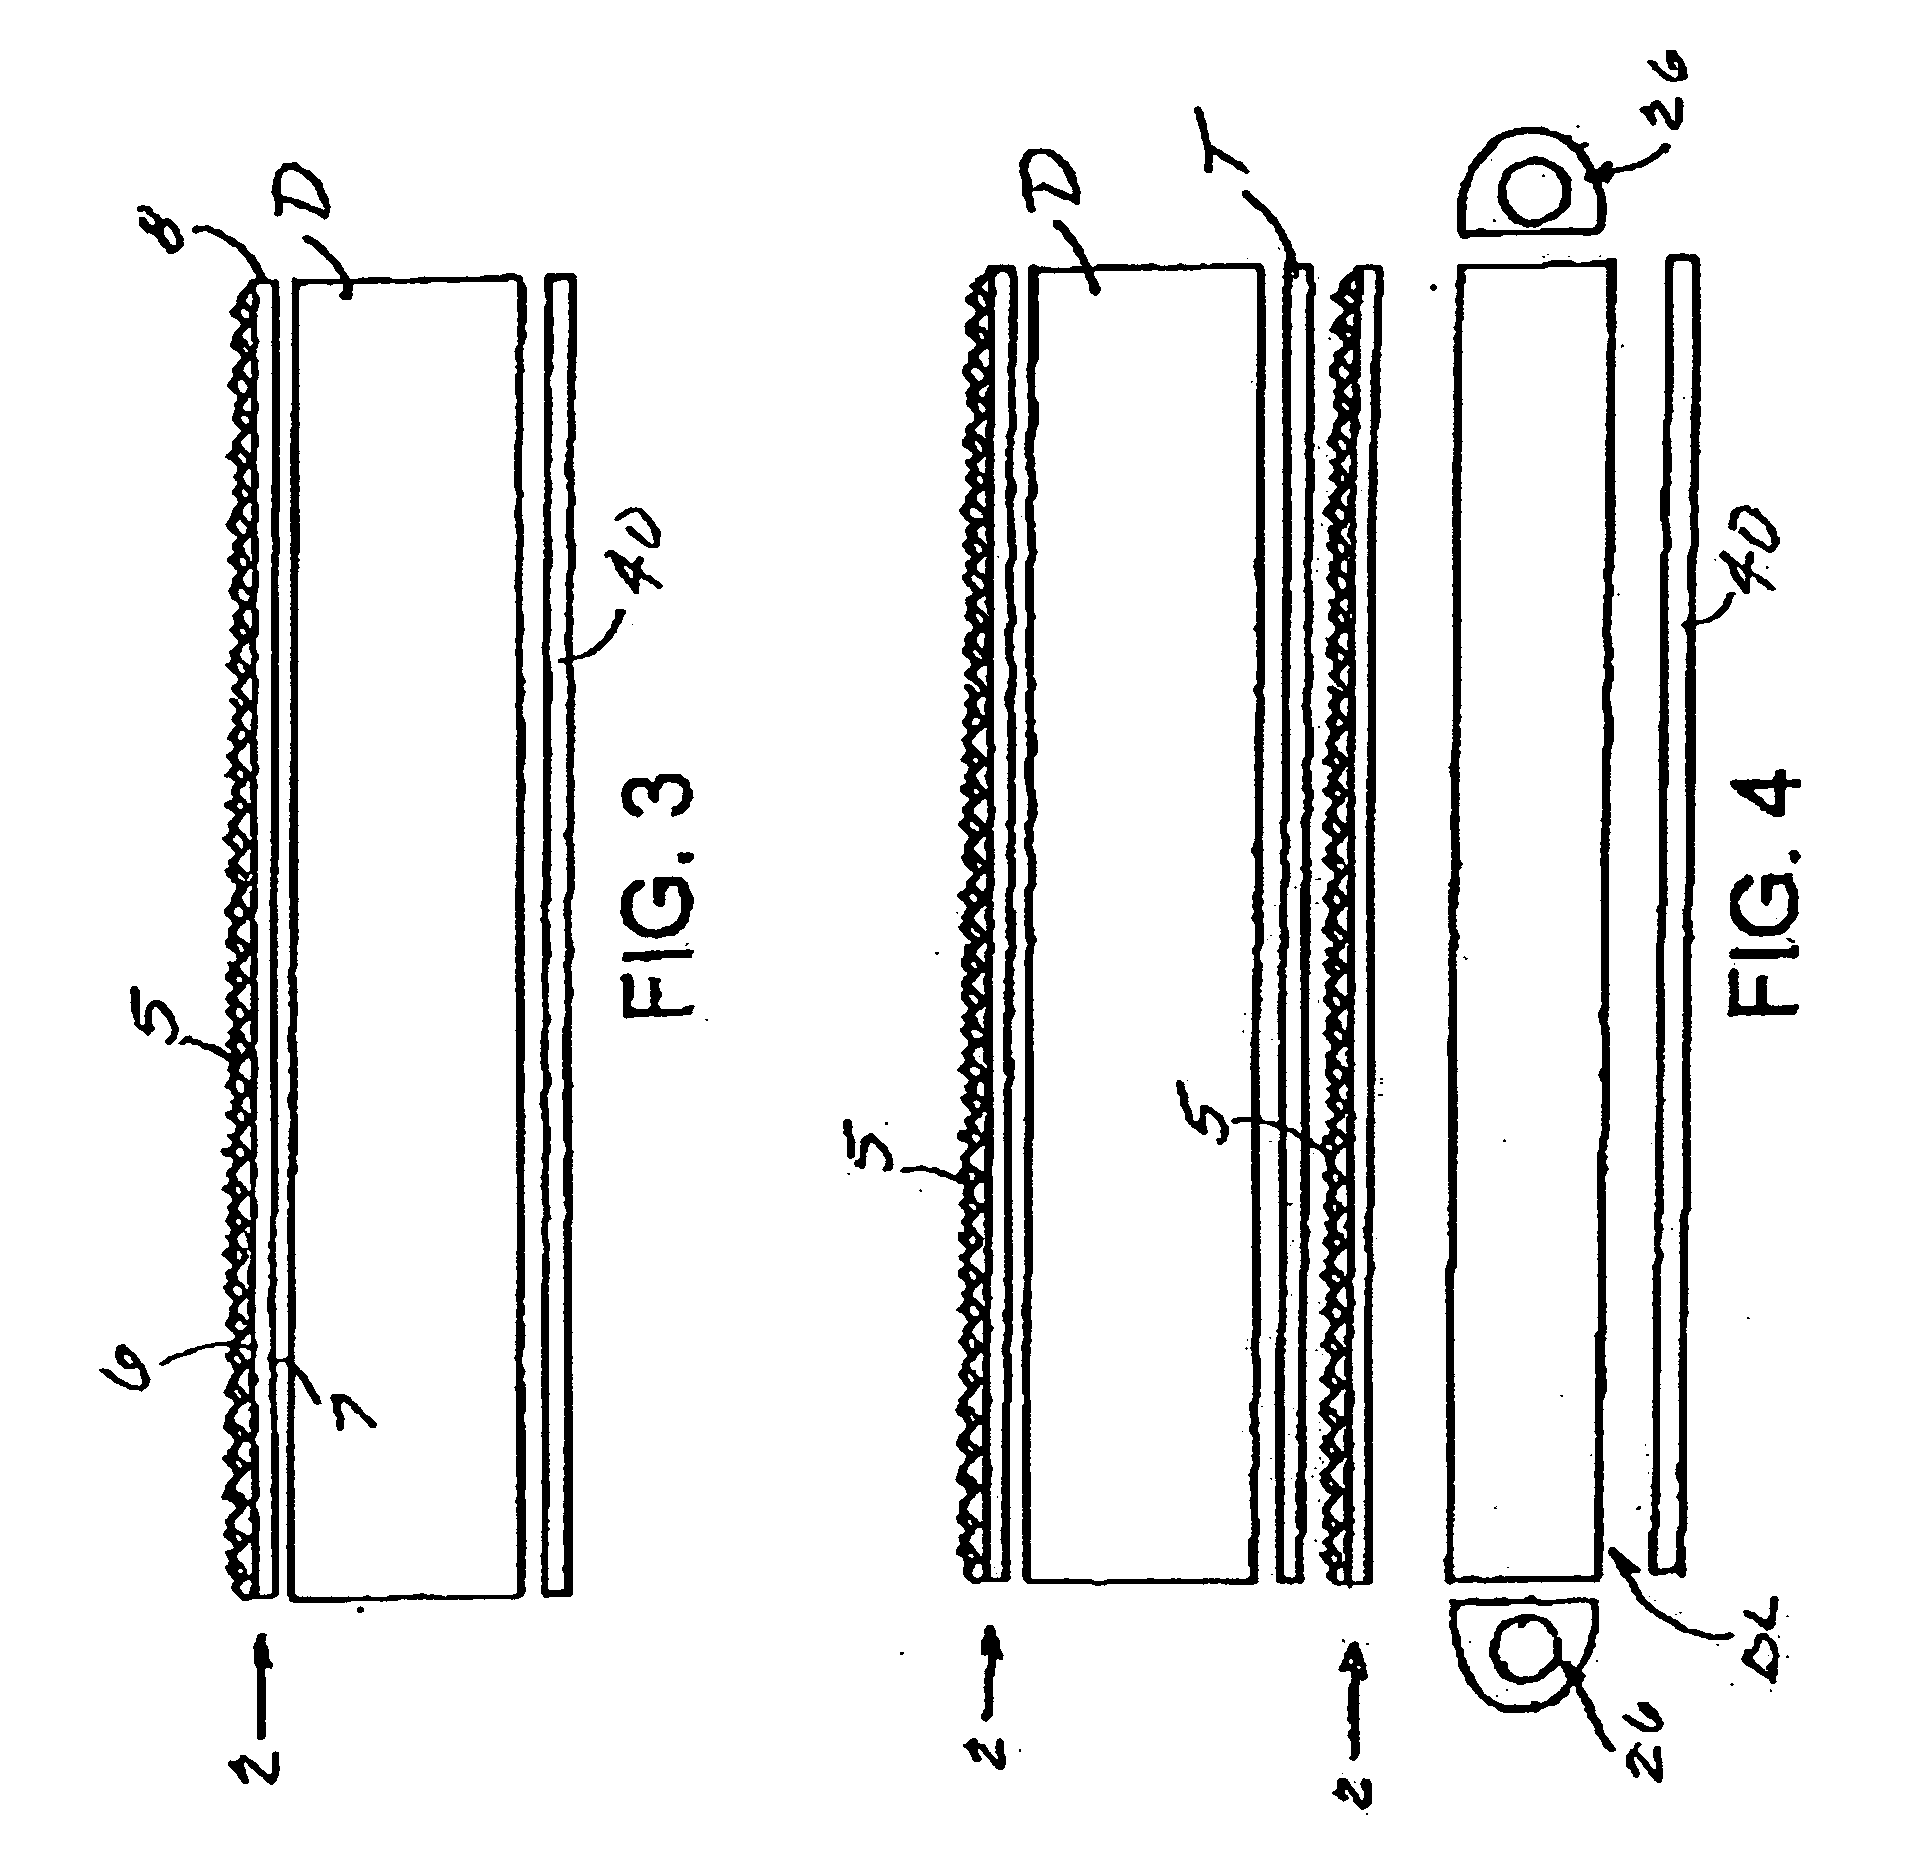 Method for making tools for micro replication